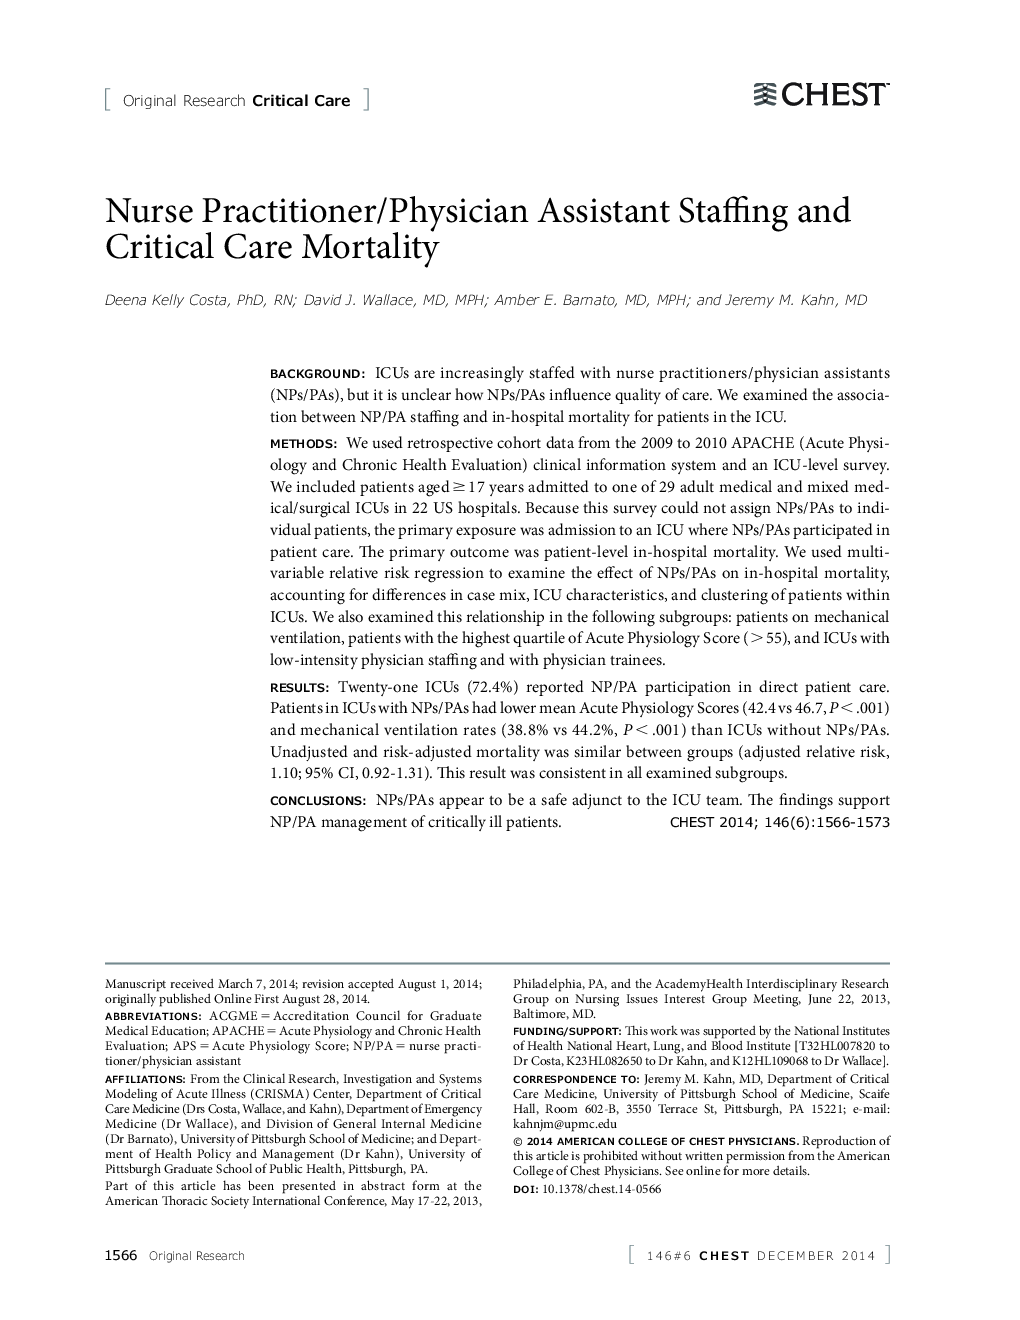 Nurse Practitioner/Physician Assistant Staffing and Critical Care Mortality